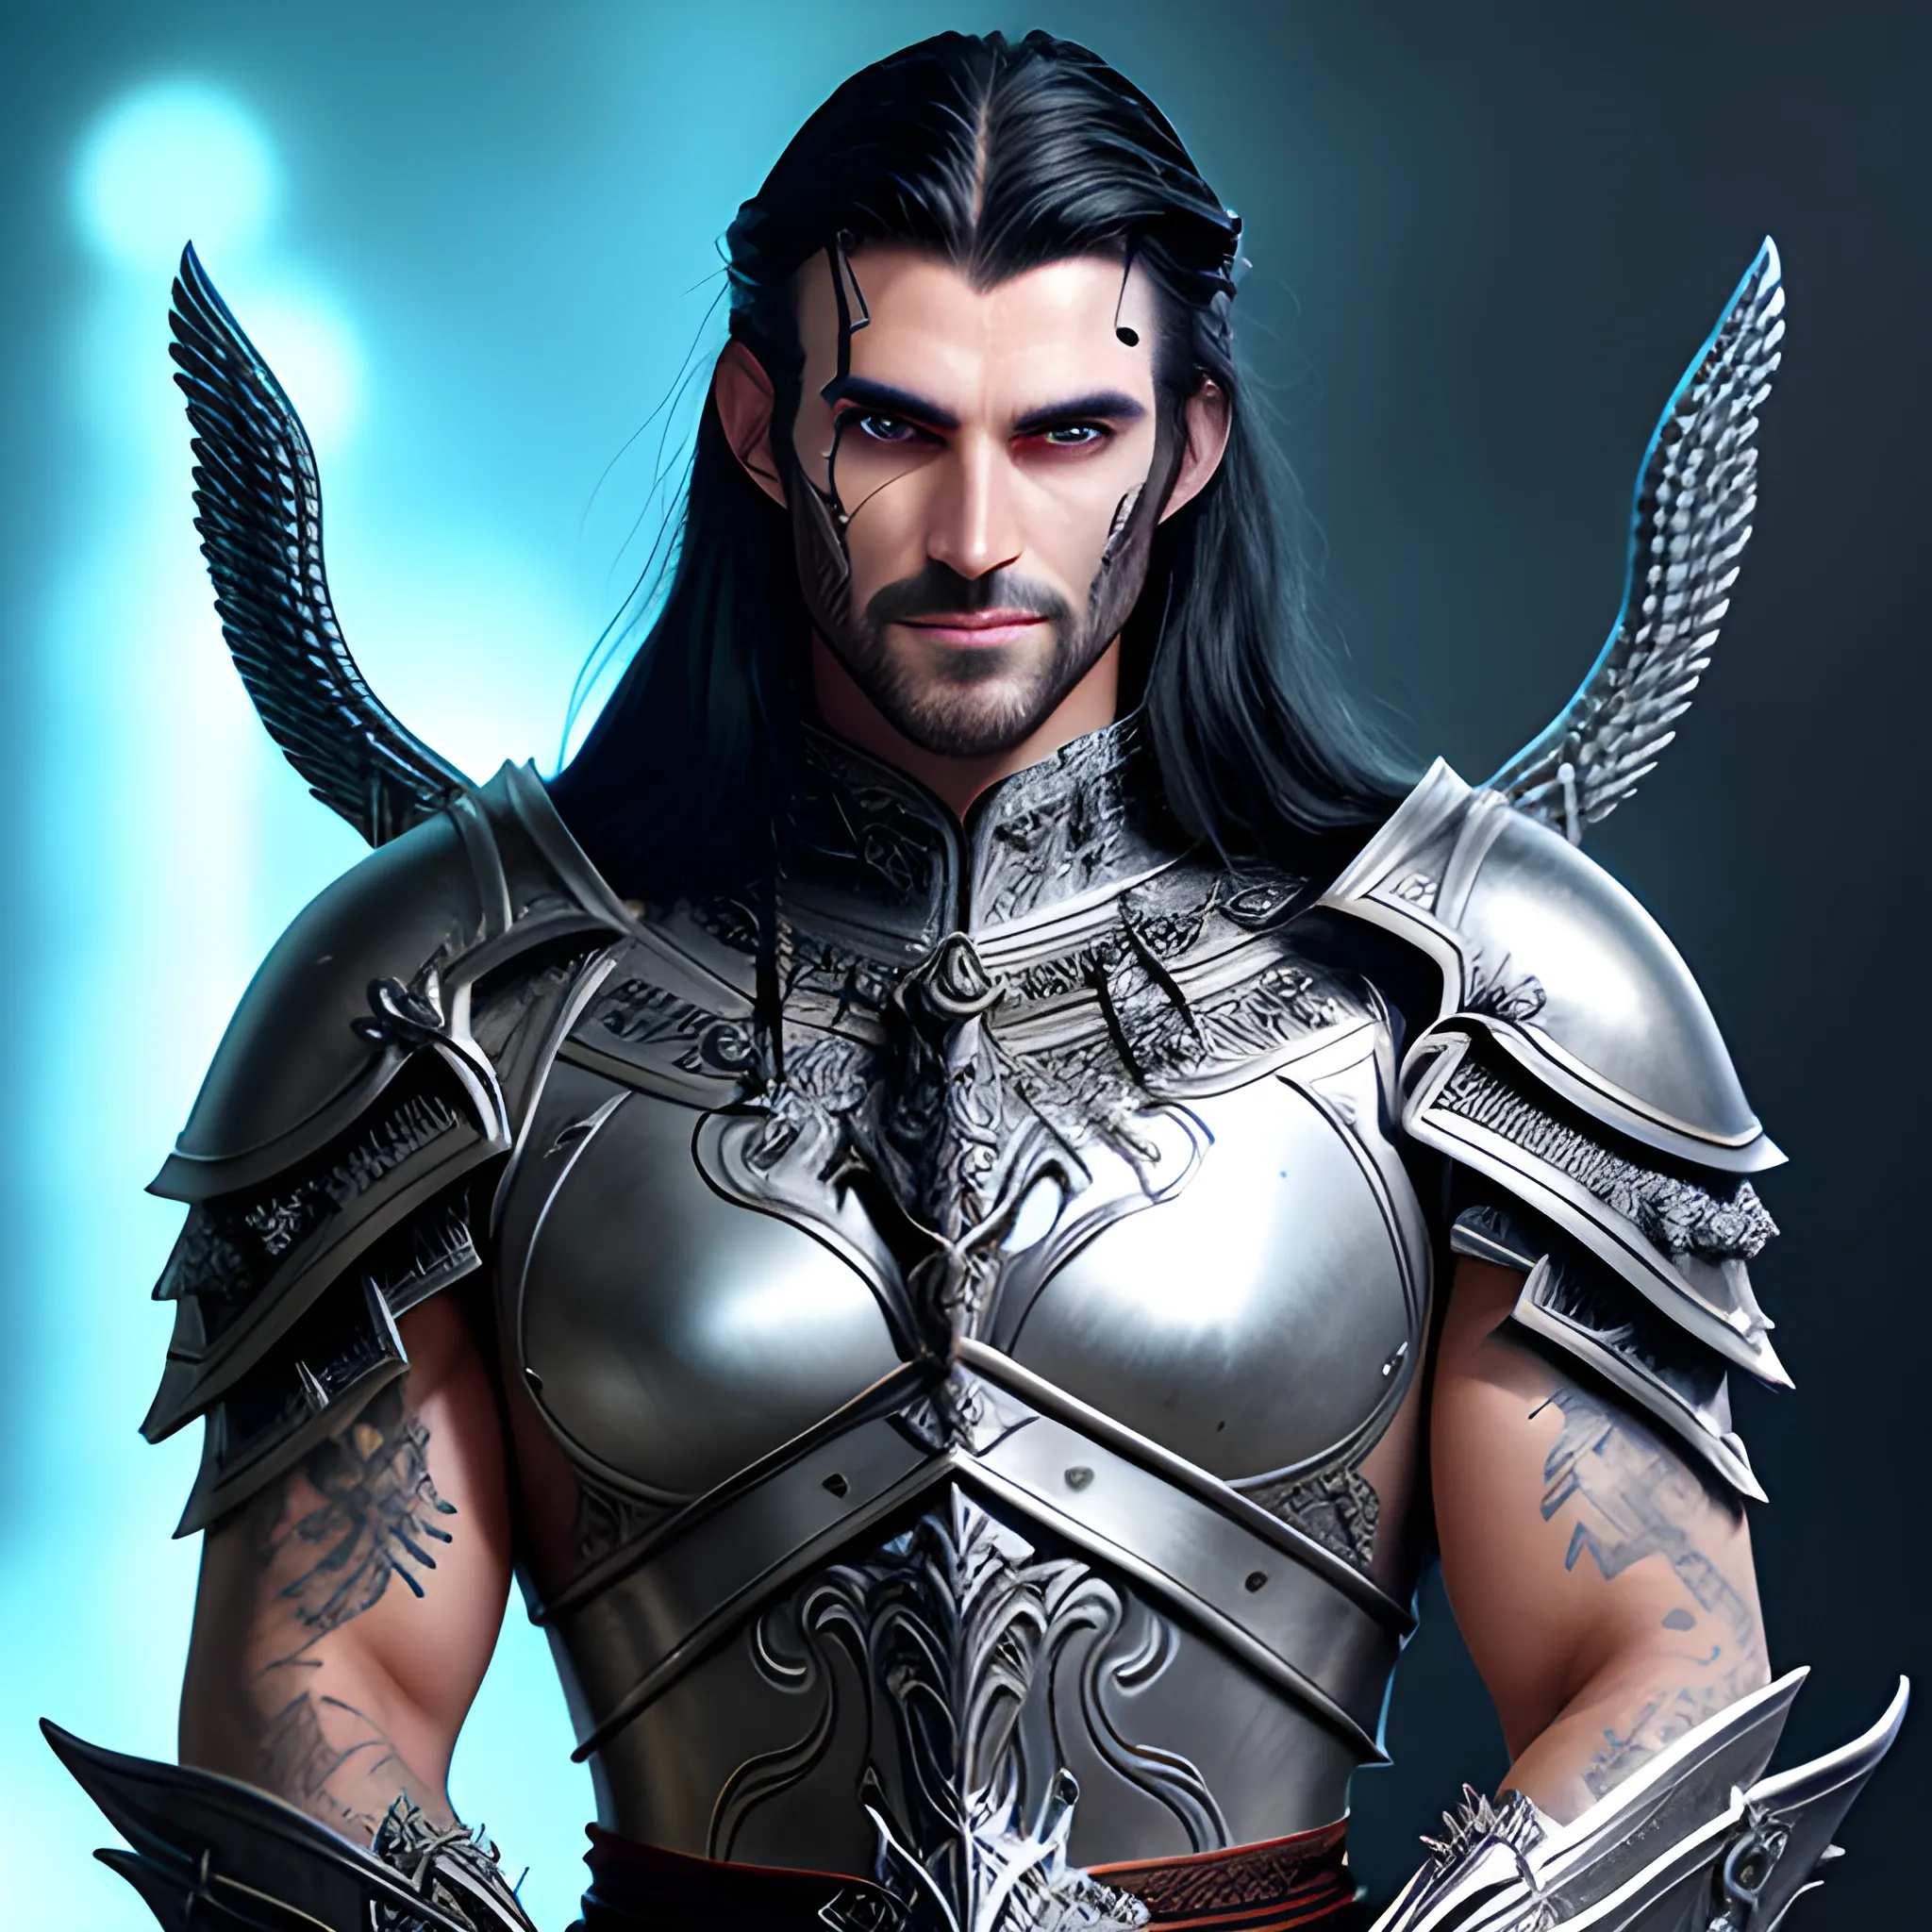 fantasy, paladin, warrior, metal skin, male, long black hair, icy eyes, blue eyes, intricate light silver armor, smiling, hyper realistic, dungeons and dragons, strong, armed, black hair, Oil Painting, filigree skin, silver skin, silver flame necklace, grey skin, iron skin, platinum skin, human ears, Oil Painting, young, handsome, thin tribal facial tattoos, steel eyes, face tattoo, face scarring, aluminium skin, friendly, no helmet, happy, confident, black hair, grinning, good, warhammer, bust, generous, wielding weapon, holding fire, riding griffin